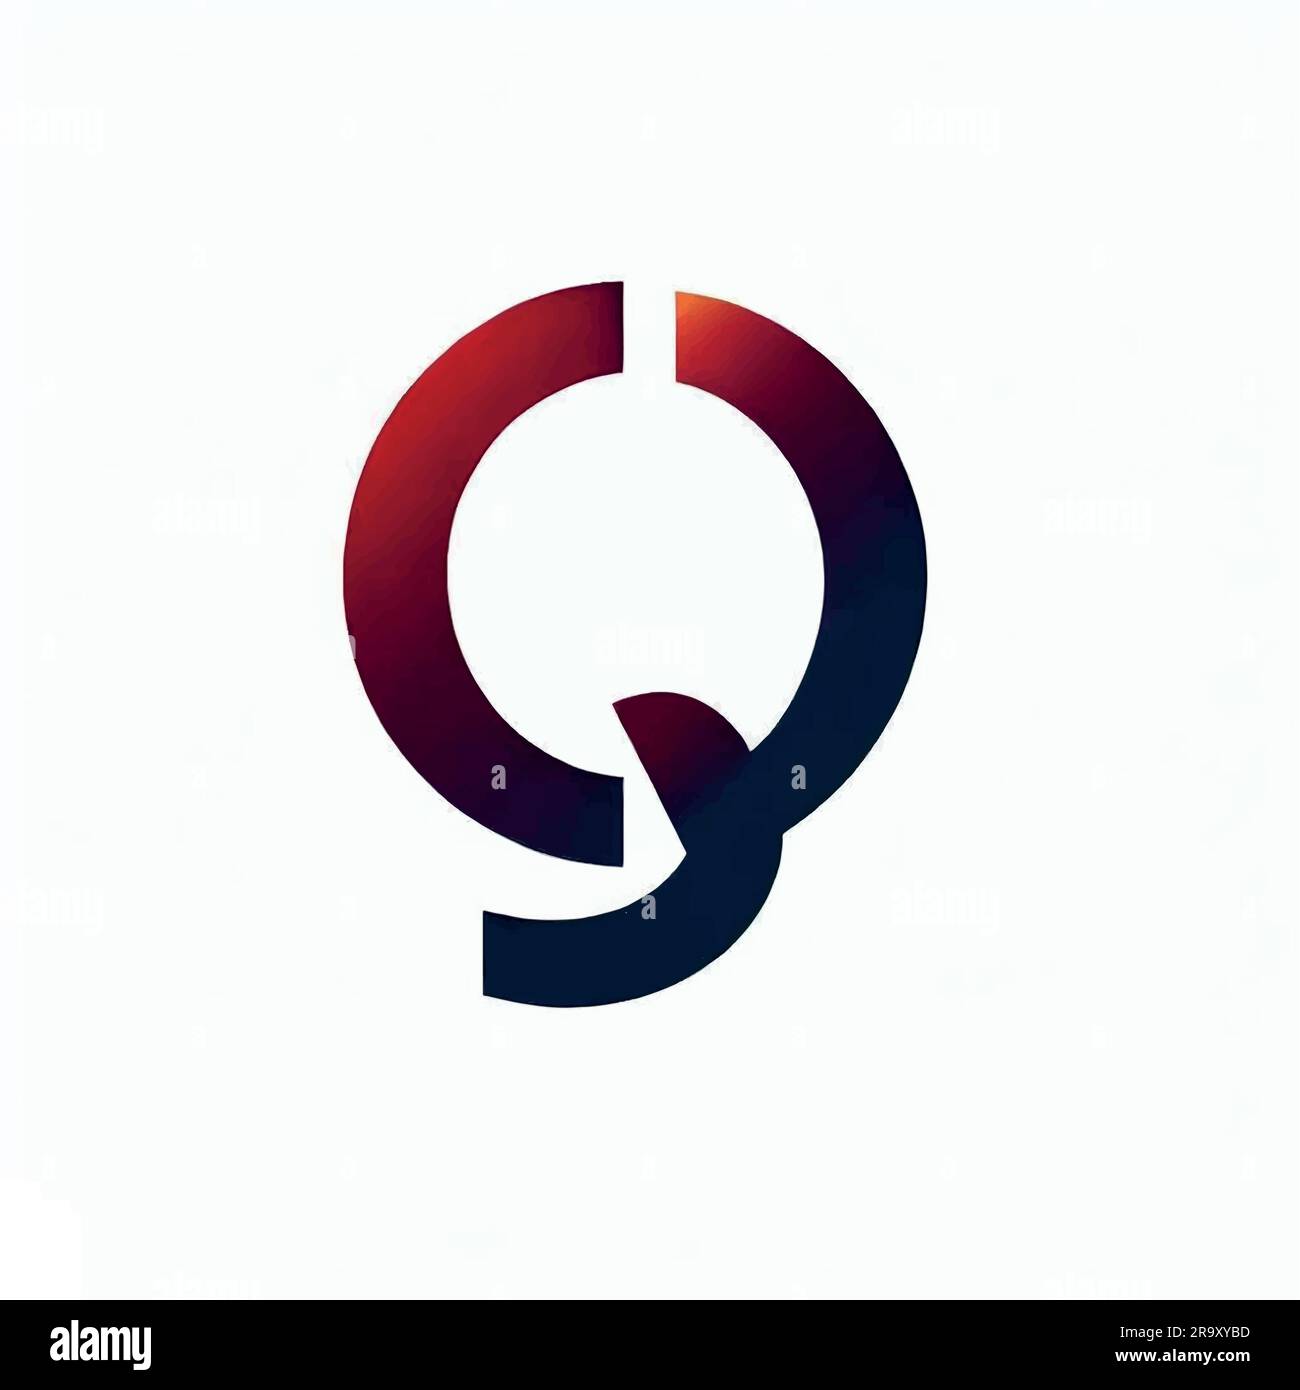 logo illustration of the letter q on a white background Stock Vector